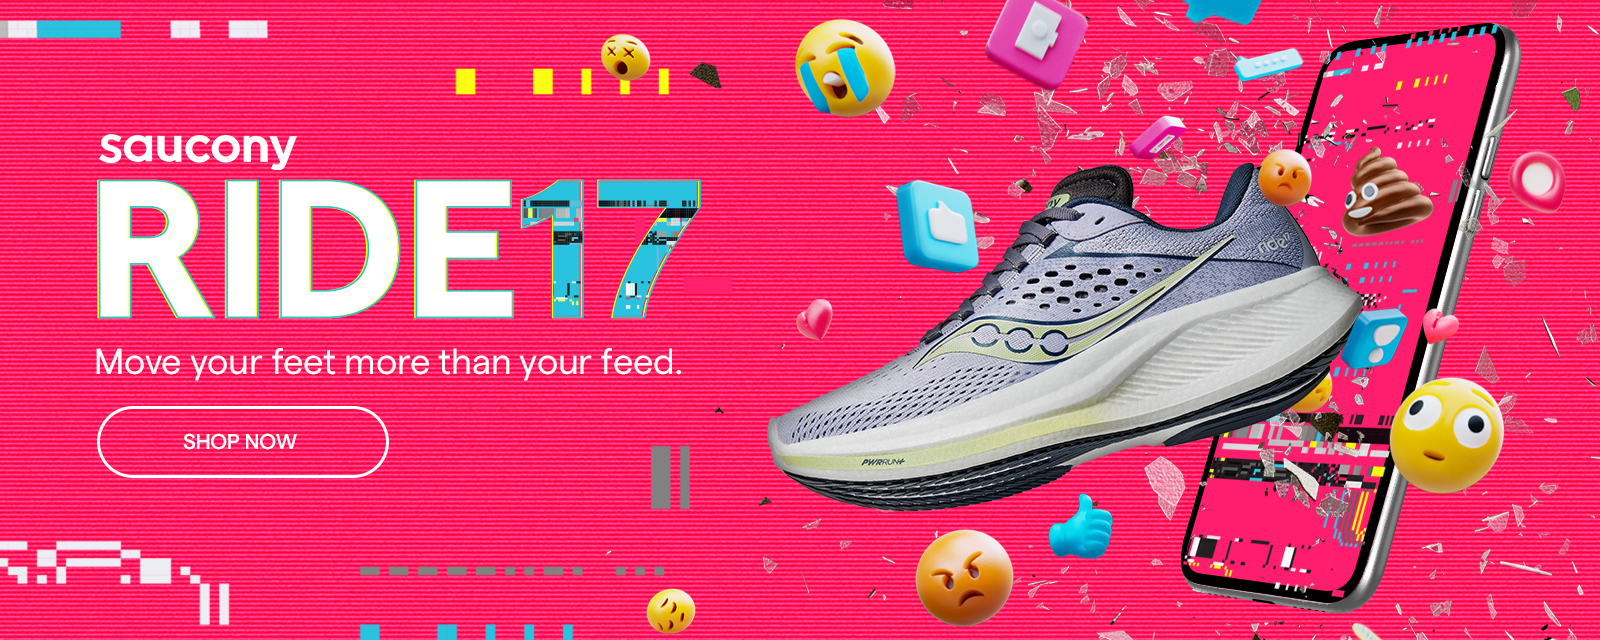 Saucony-Ride-17-Banner-1600x640-Pink.png